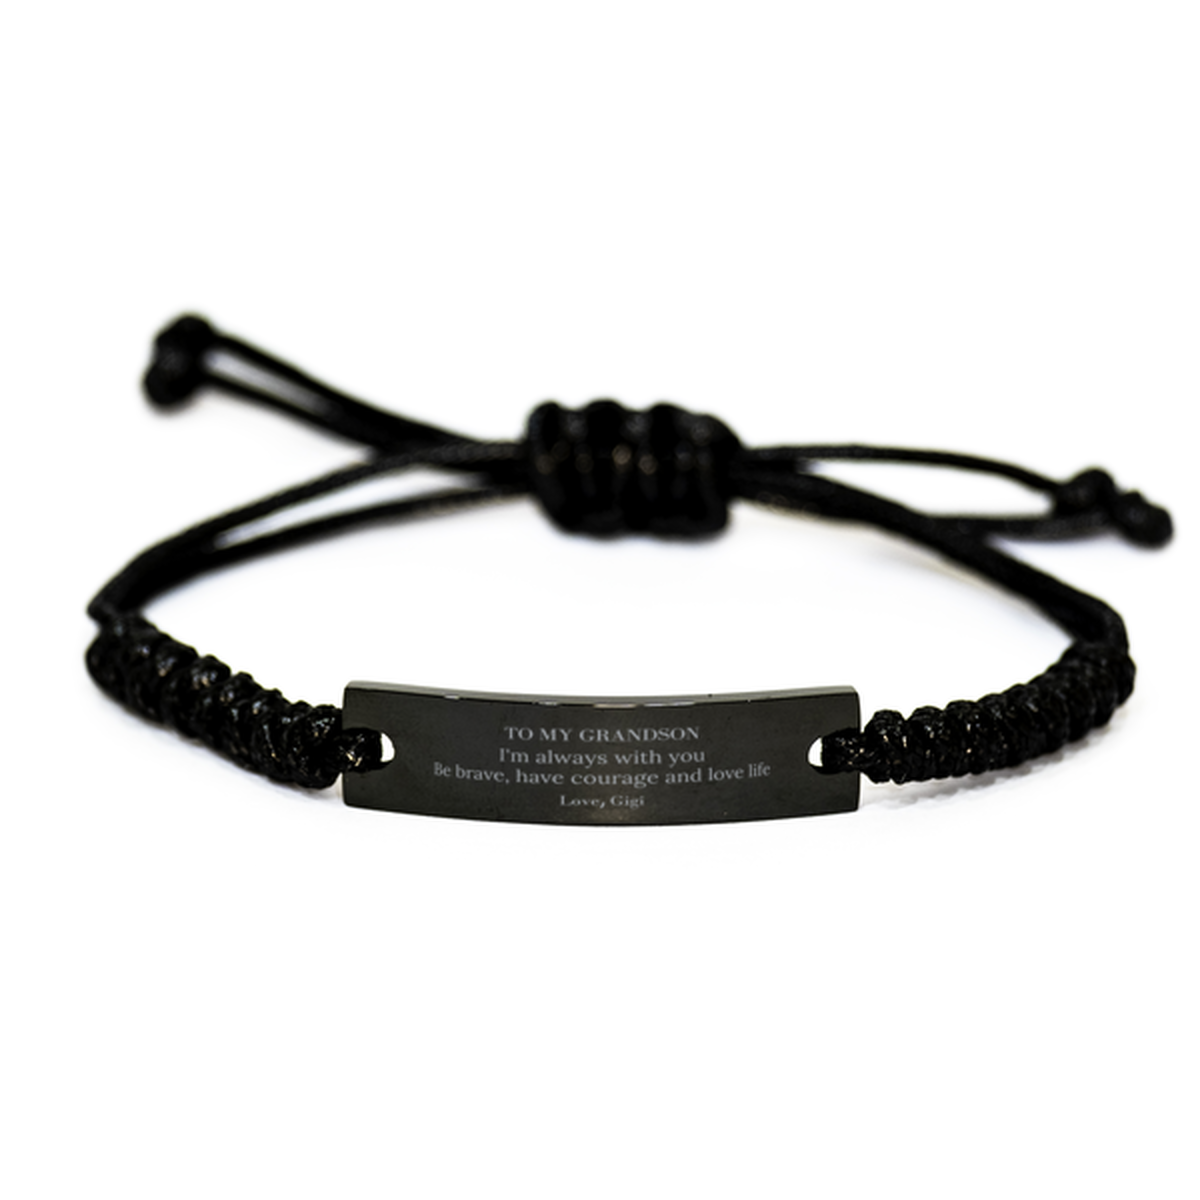 To My Grandson Gifts from Gigi, Unique Black Rope Bracelet Inspirational Christmas Birthday Graduation Gifts for Grandson I'm always with you. Be brave, have courage and love life. Love, Gigi